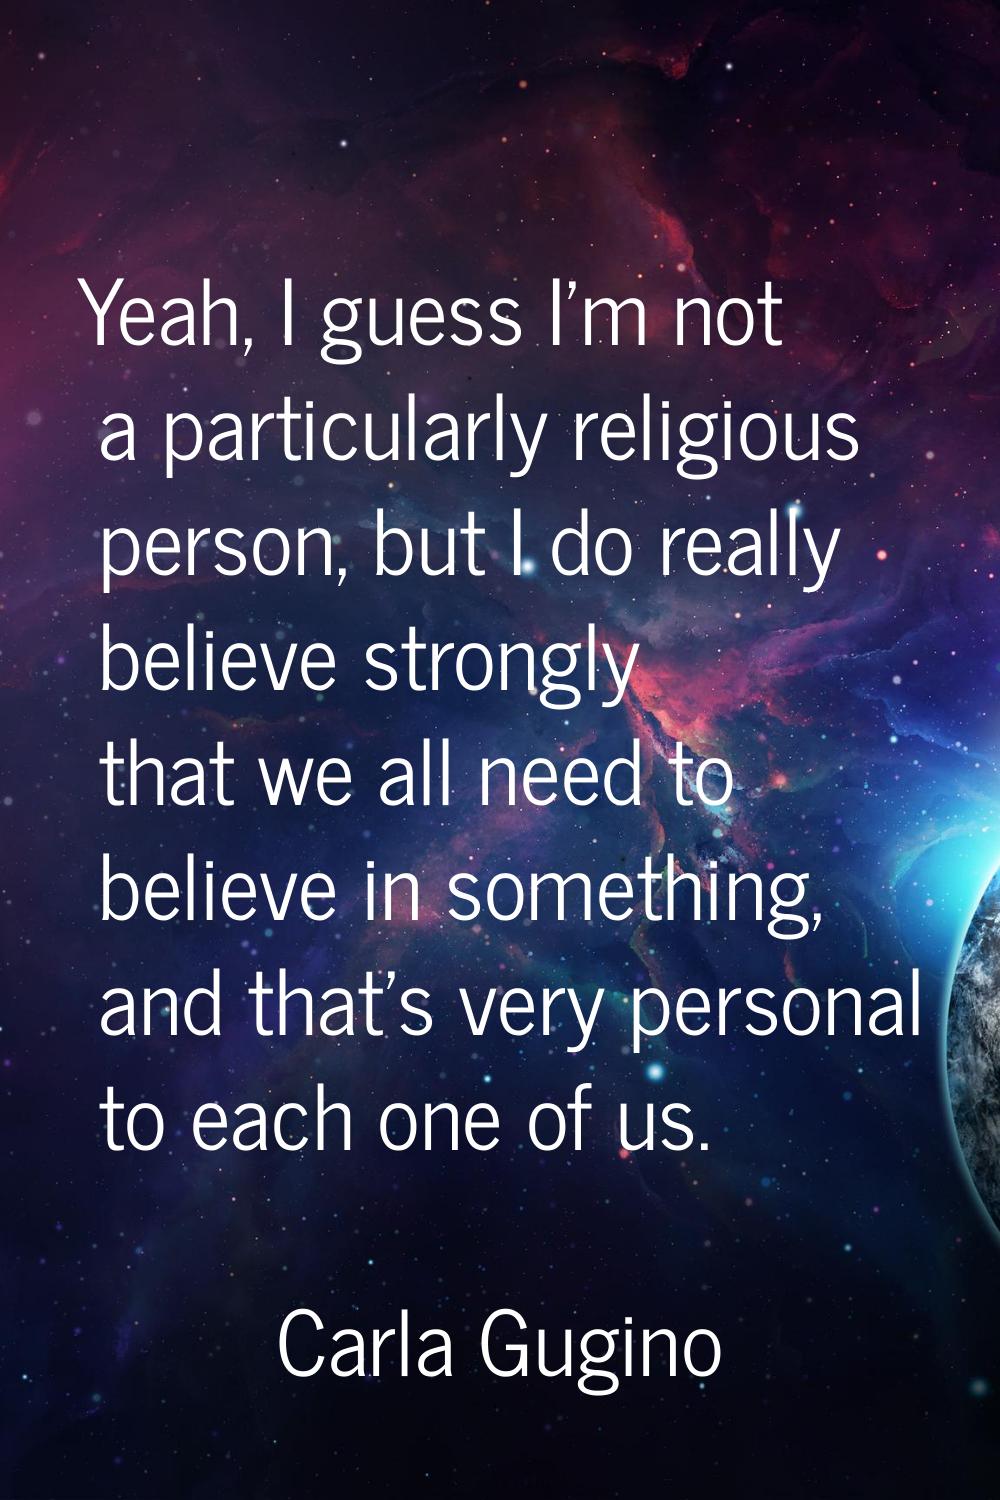 Yeah, I guess I'm not a particularly religious person, but I do really believe strongly that we all